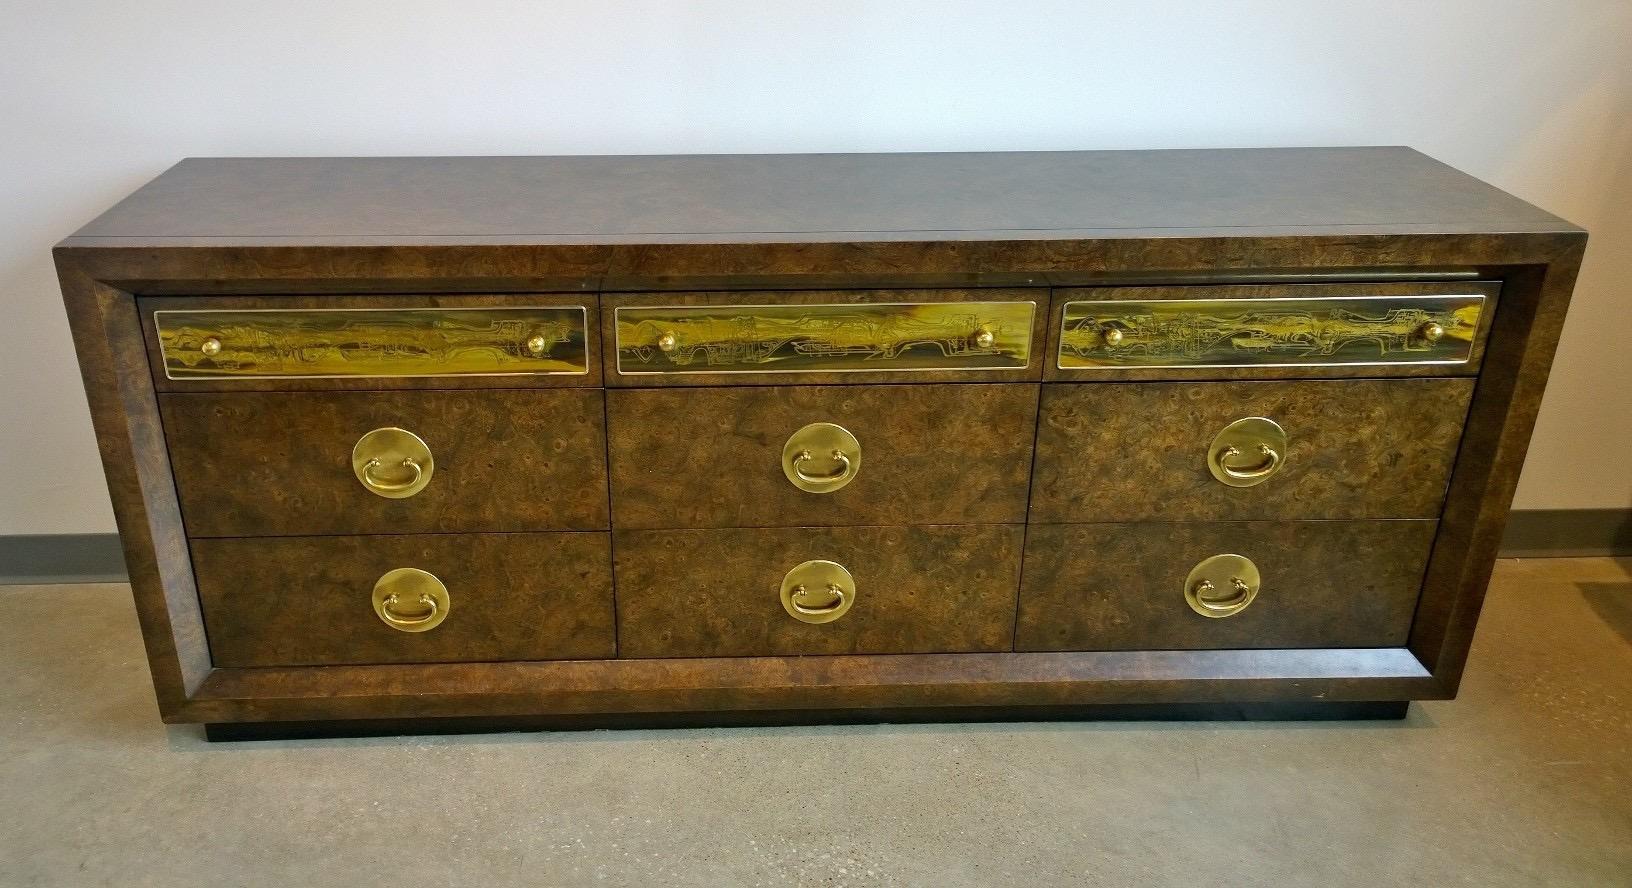 The offered piece is a signed Mid-Century Modern Bernhard Rohne for Mastercraft dresser or sideboard in burl wood and etched brass accents and brass hardware. The sideboard or dresser is an outstanding example of the partnership between the